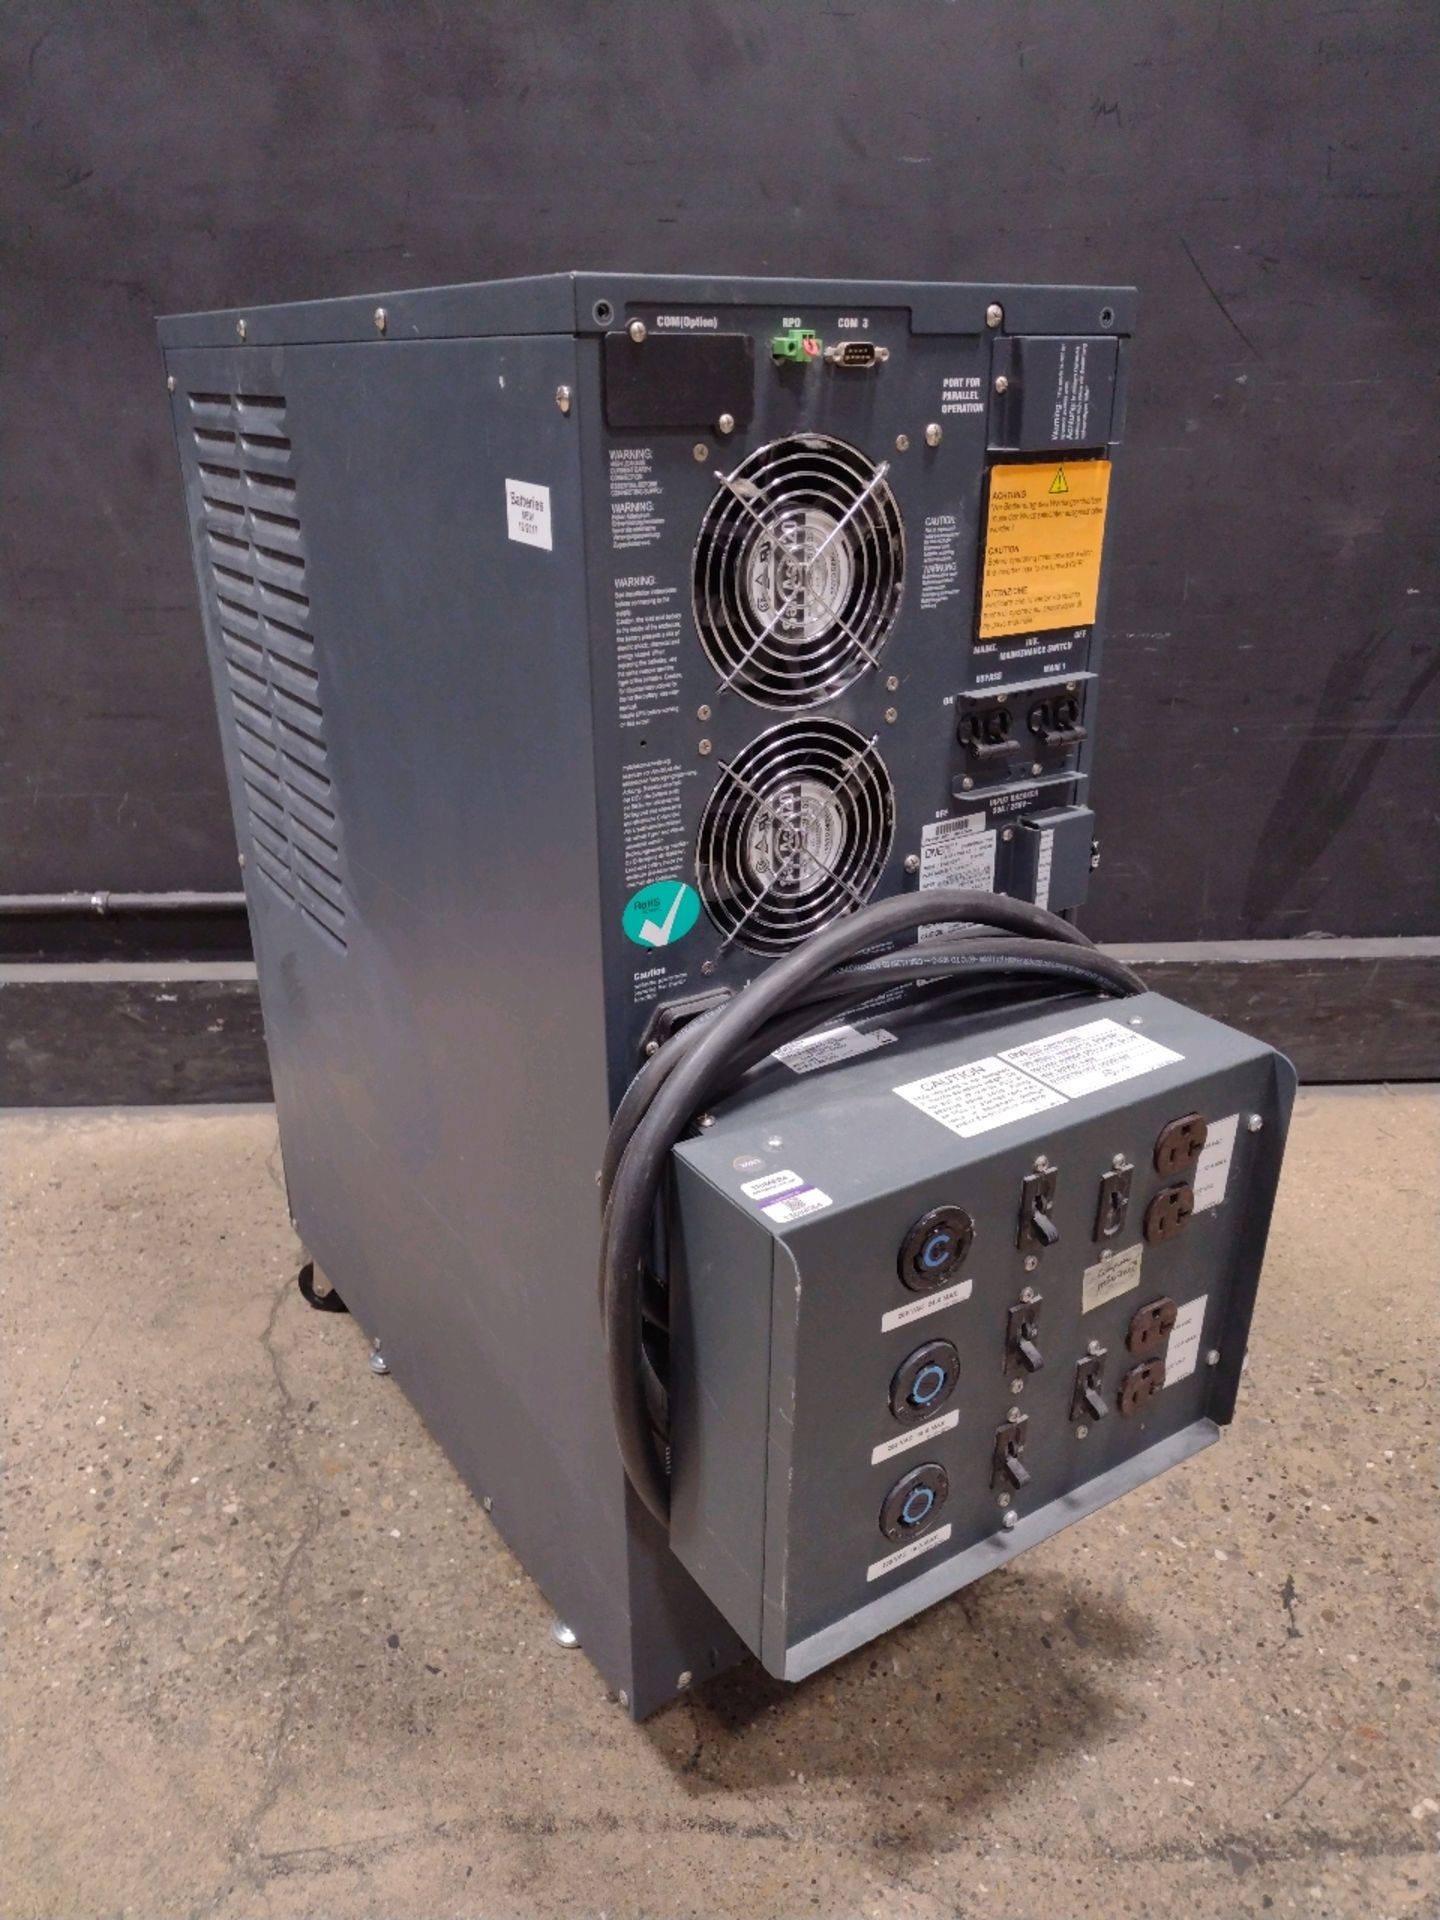 ONE AC SINERGY II UPS (LOCATED AT 3325 MOUNT PROSPECT ROAD, FRANKLIN PARK, IL, 60131) - Image 2 of 3